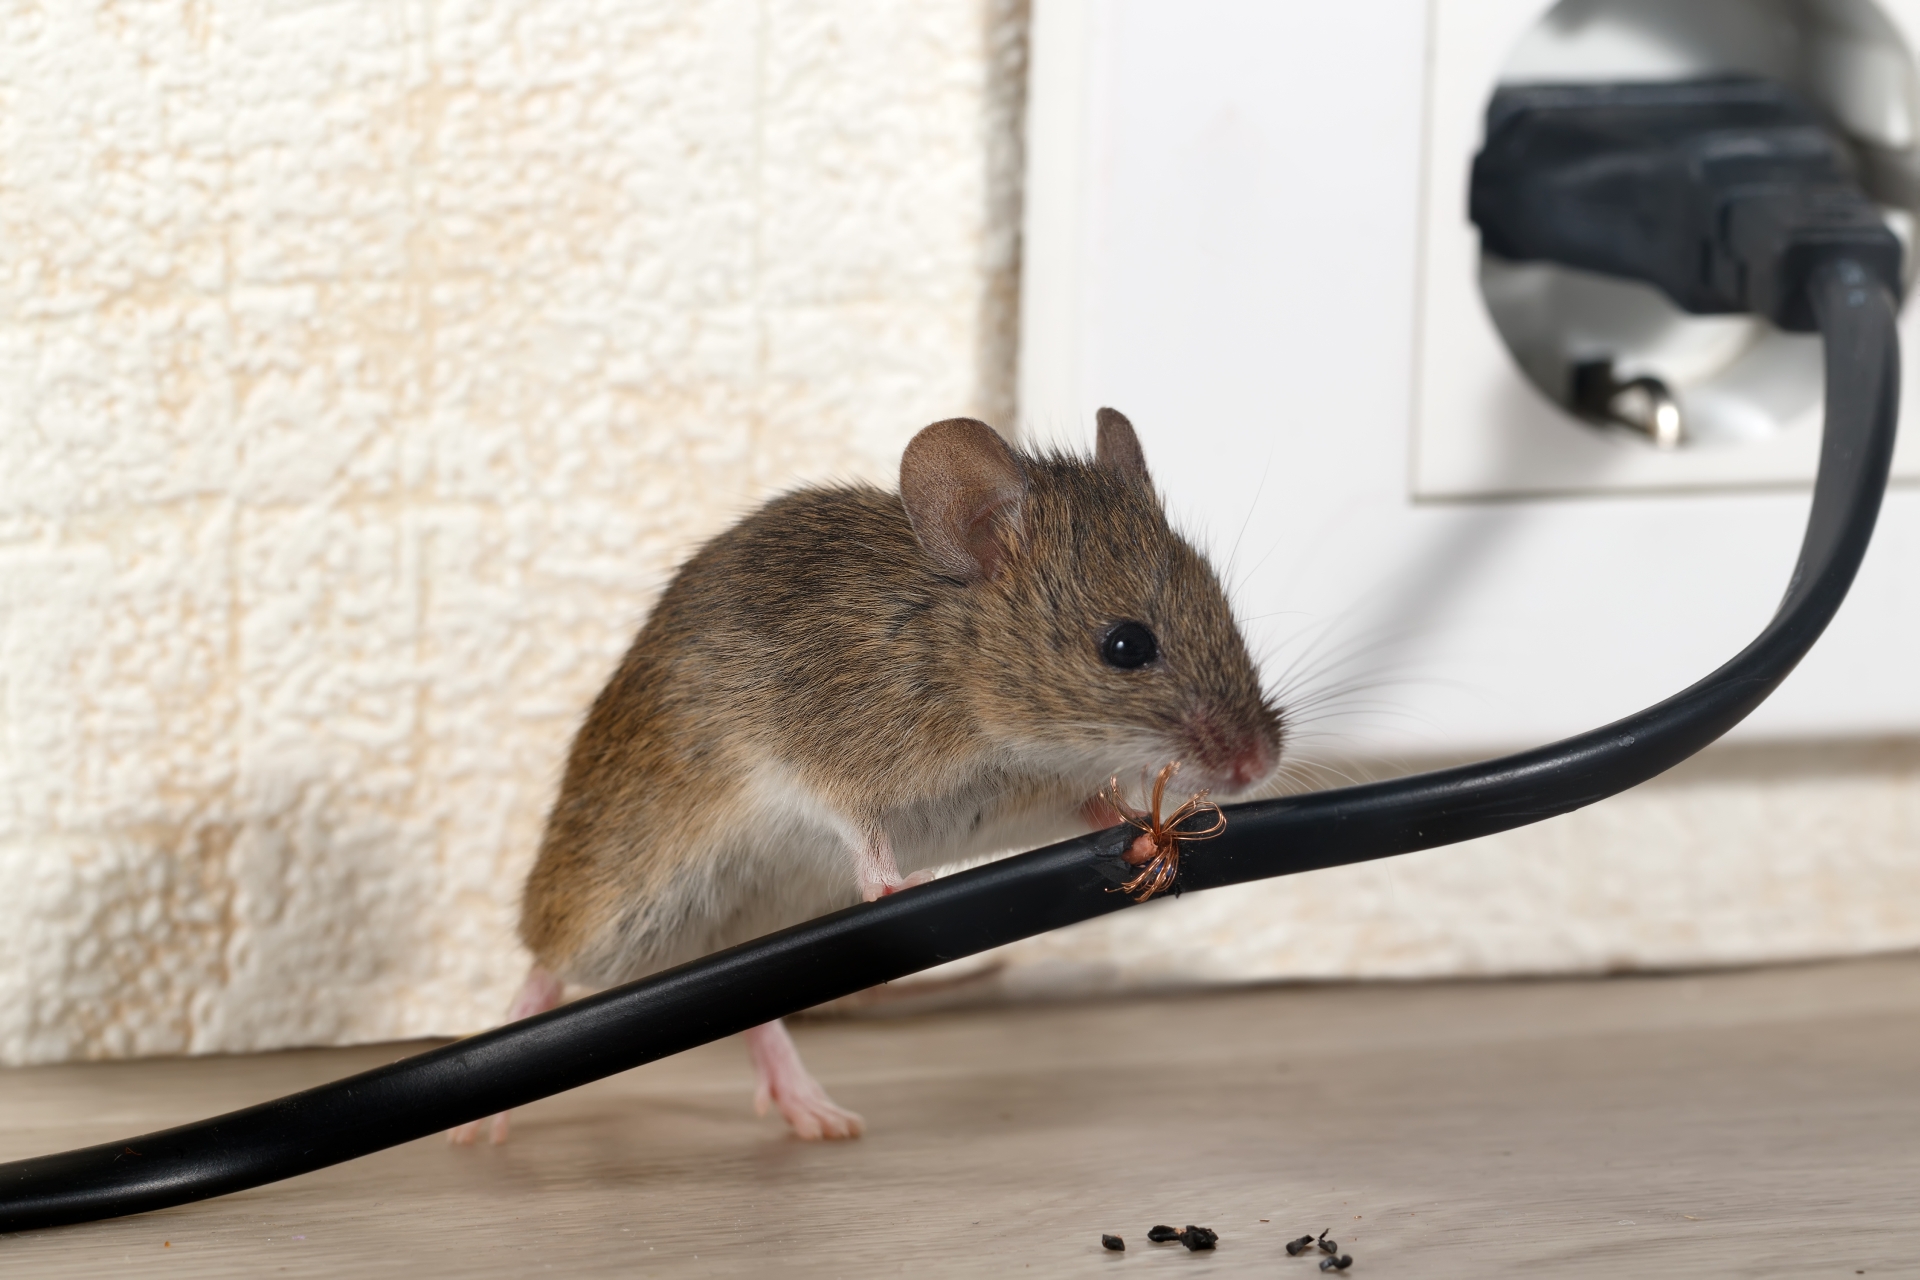 Mice Infestation, Pest Control in Richmond Hill, Richmond Park, TW10. Call Now 020 8166 9746